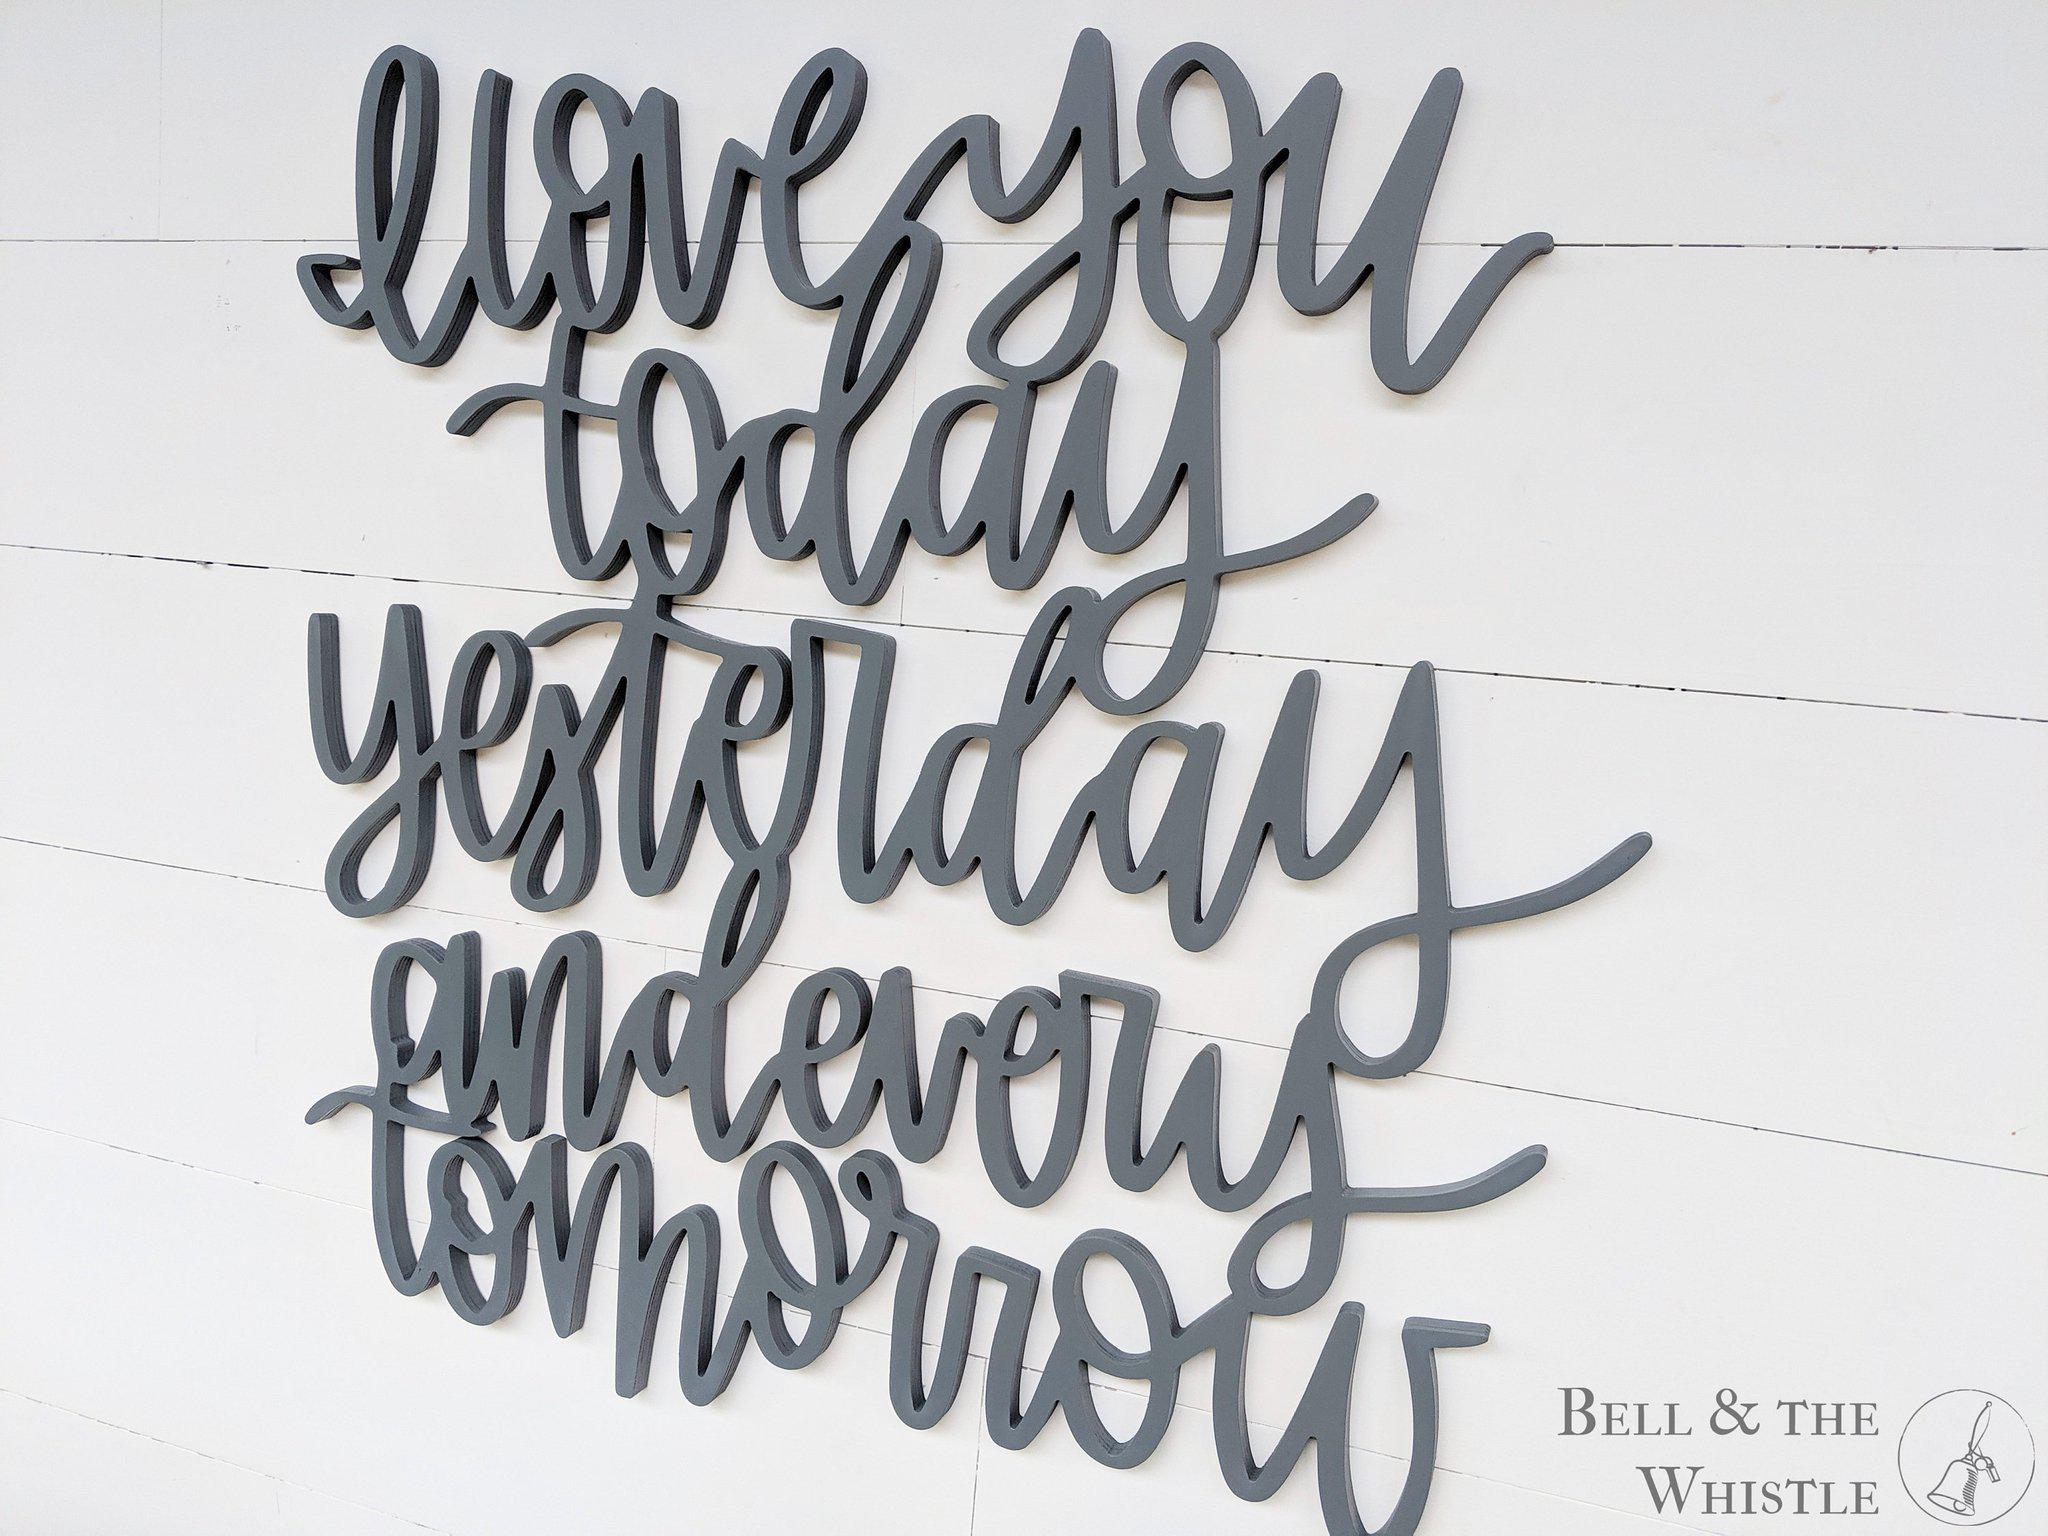 I Love You Today Yesterday and Every Tomorrow